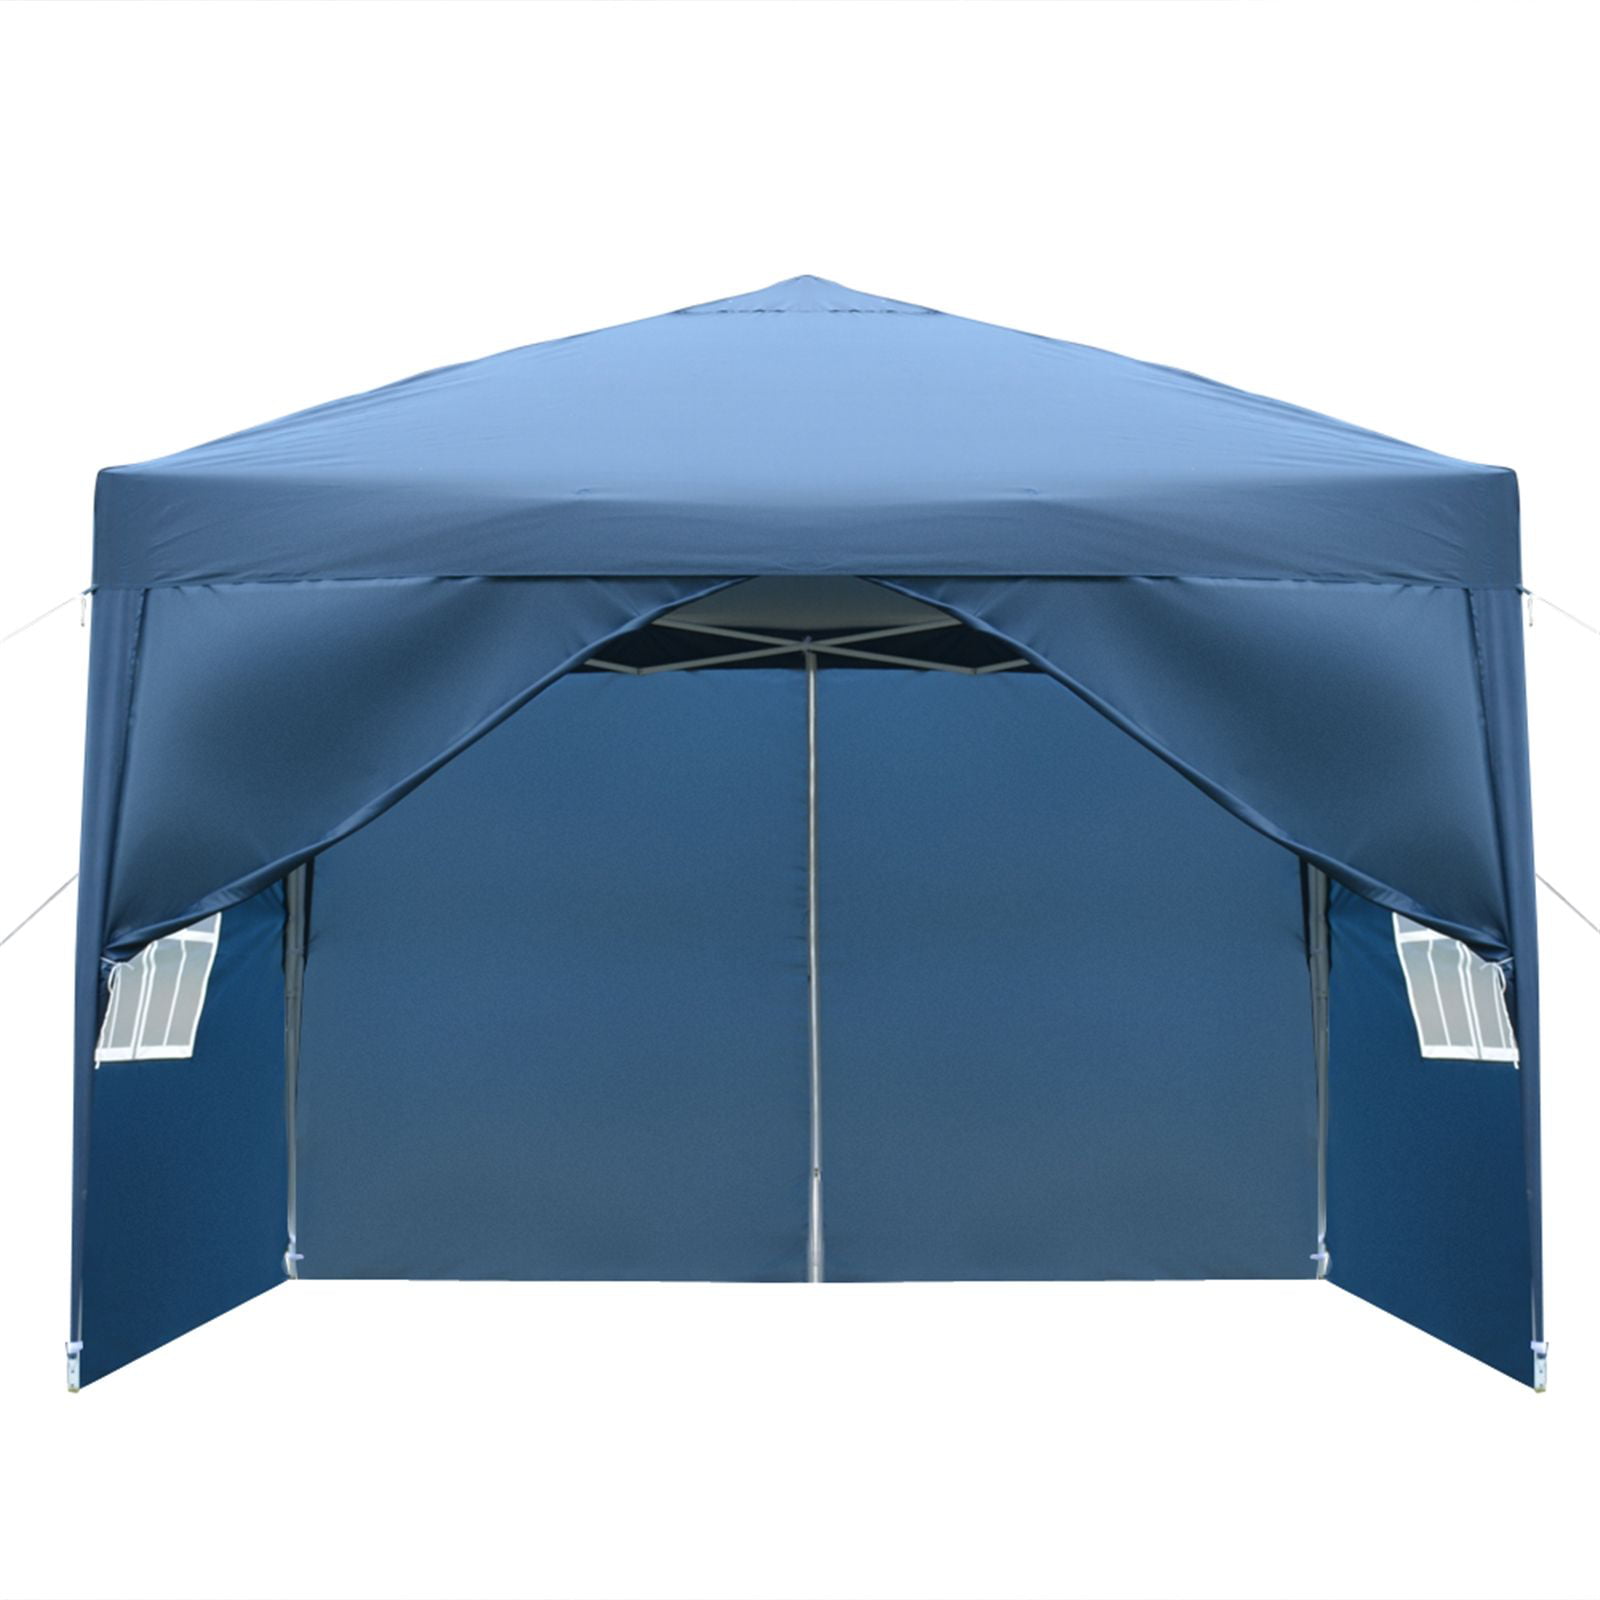 Parking Shed Folding Tent,3 x 3m Portable Home Use Waterproof Tent for Party 